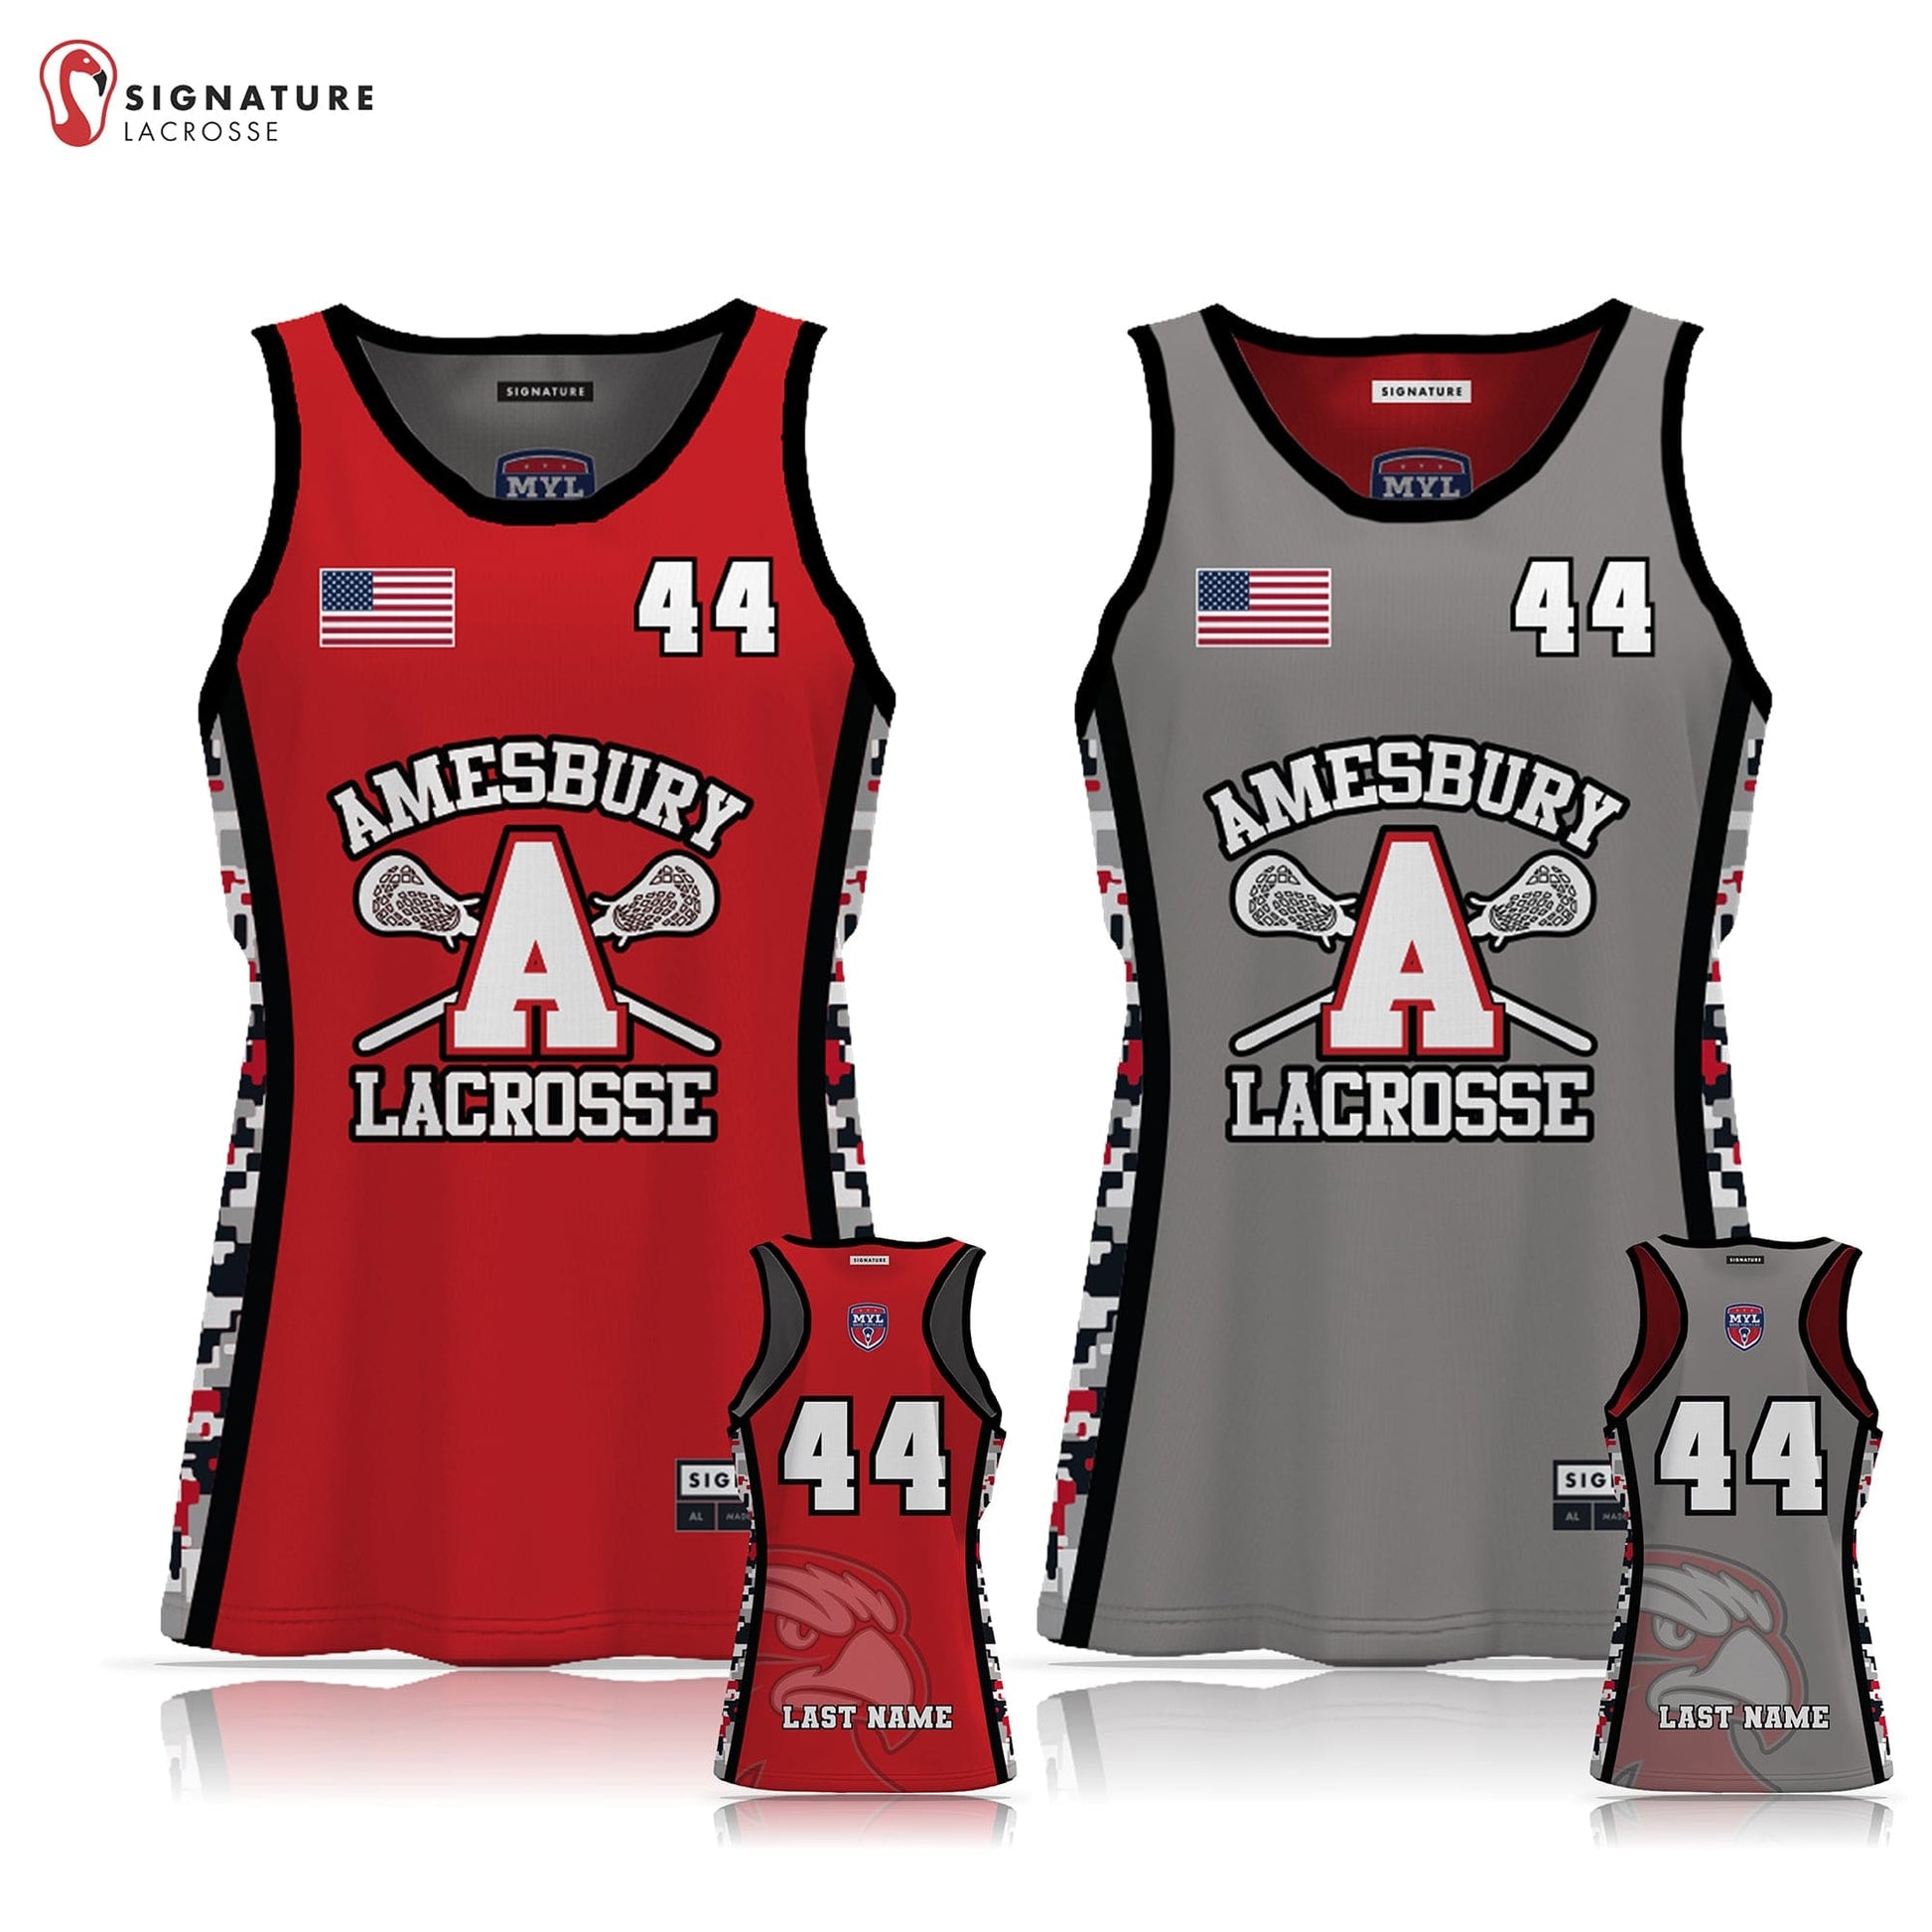 Amesbury Youth Lacrosse Women's 3 Piece Player Game Package Signature Lacrosse